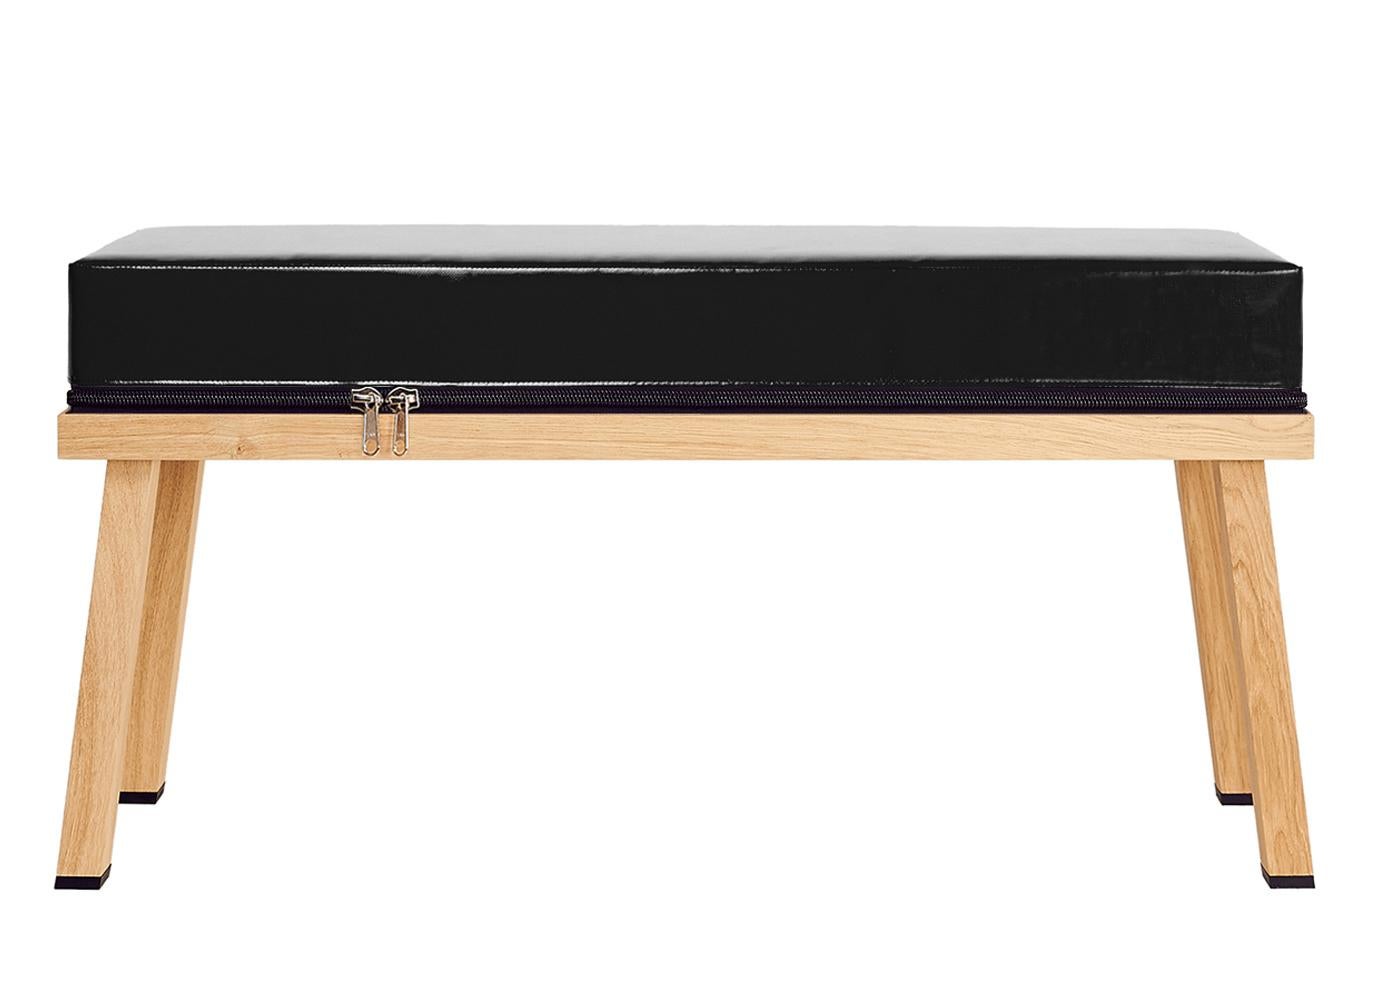 Visser and Meijwaard Truecolors High Bench in Black PVC Cloth with Zipper Detail In Excellent Condition For Sale In New York, NY